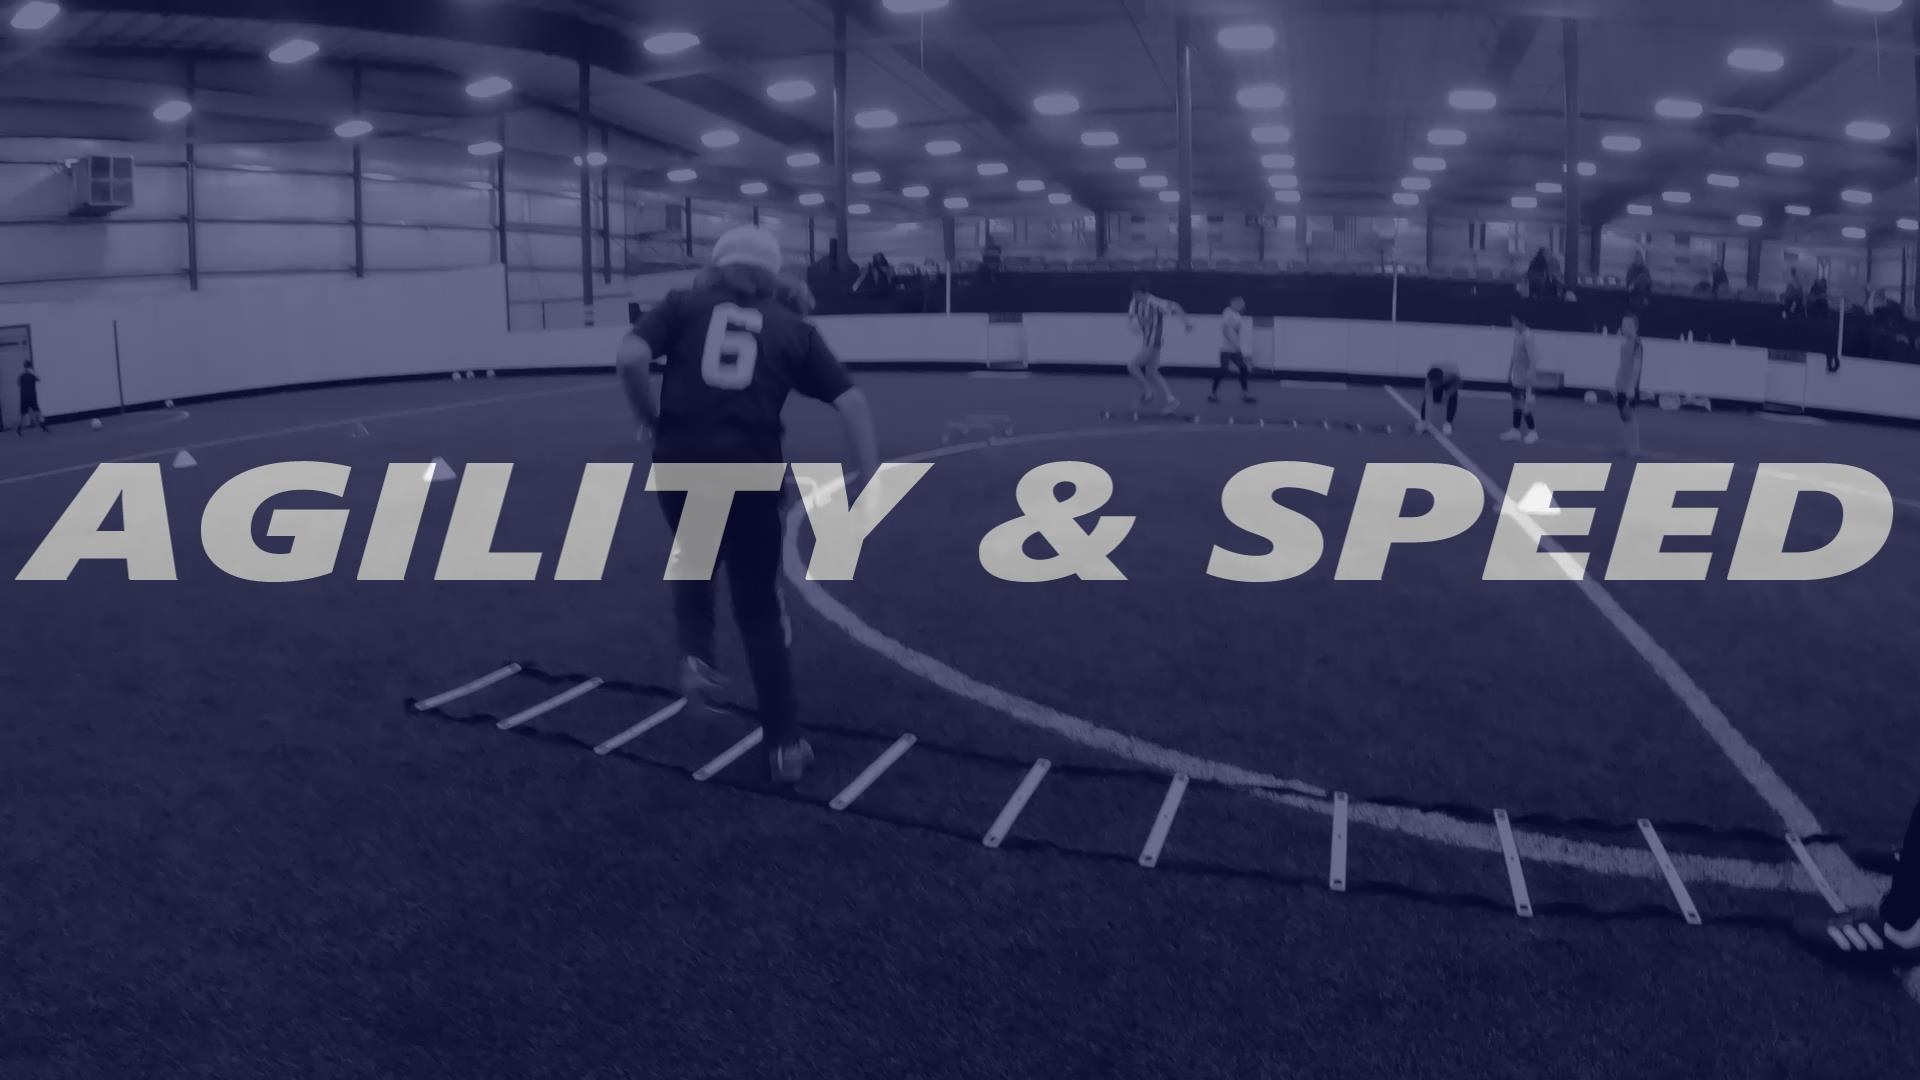 Soccer Drills for Conditioning, Agility, and Speed